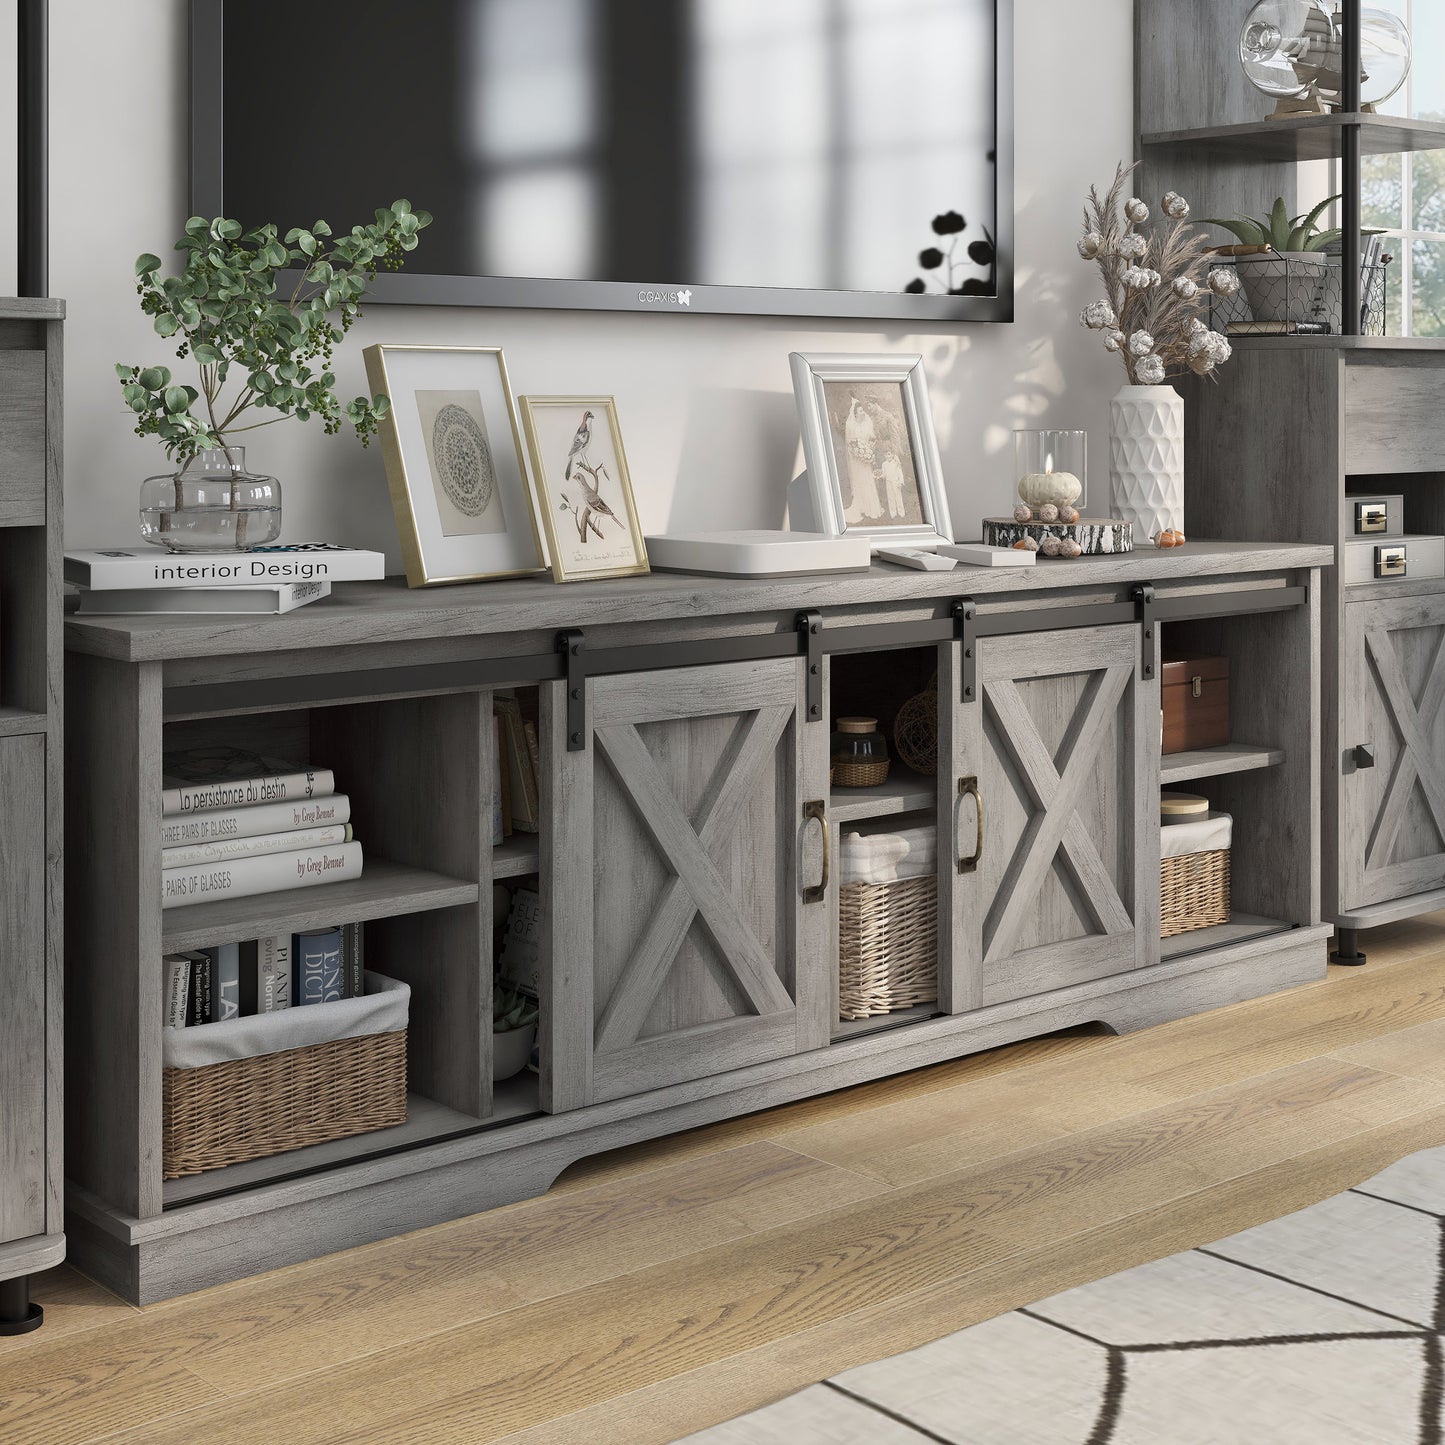 Right angled rustic vintage gray oak three-shelf two-cabinet TV stand with sliding doors in a living room with accessories